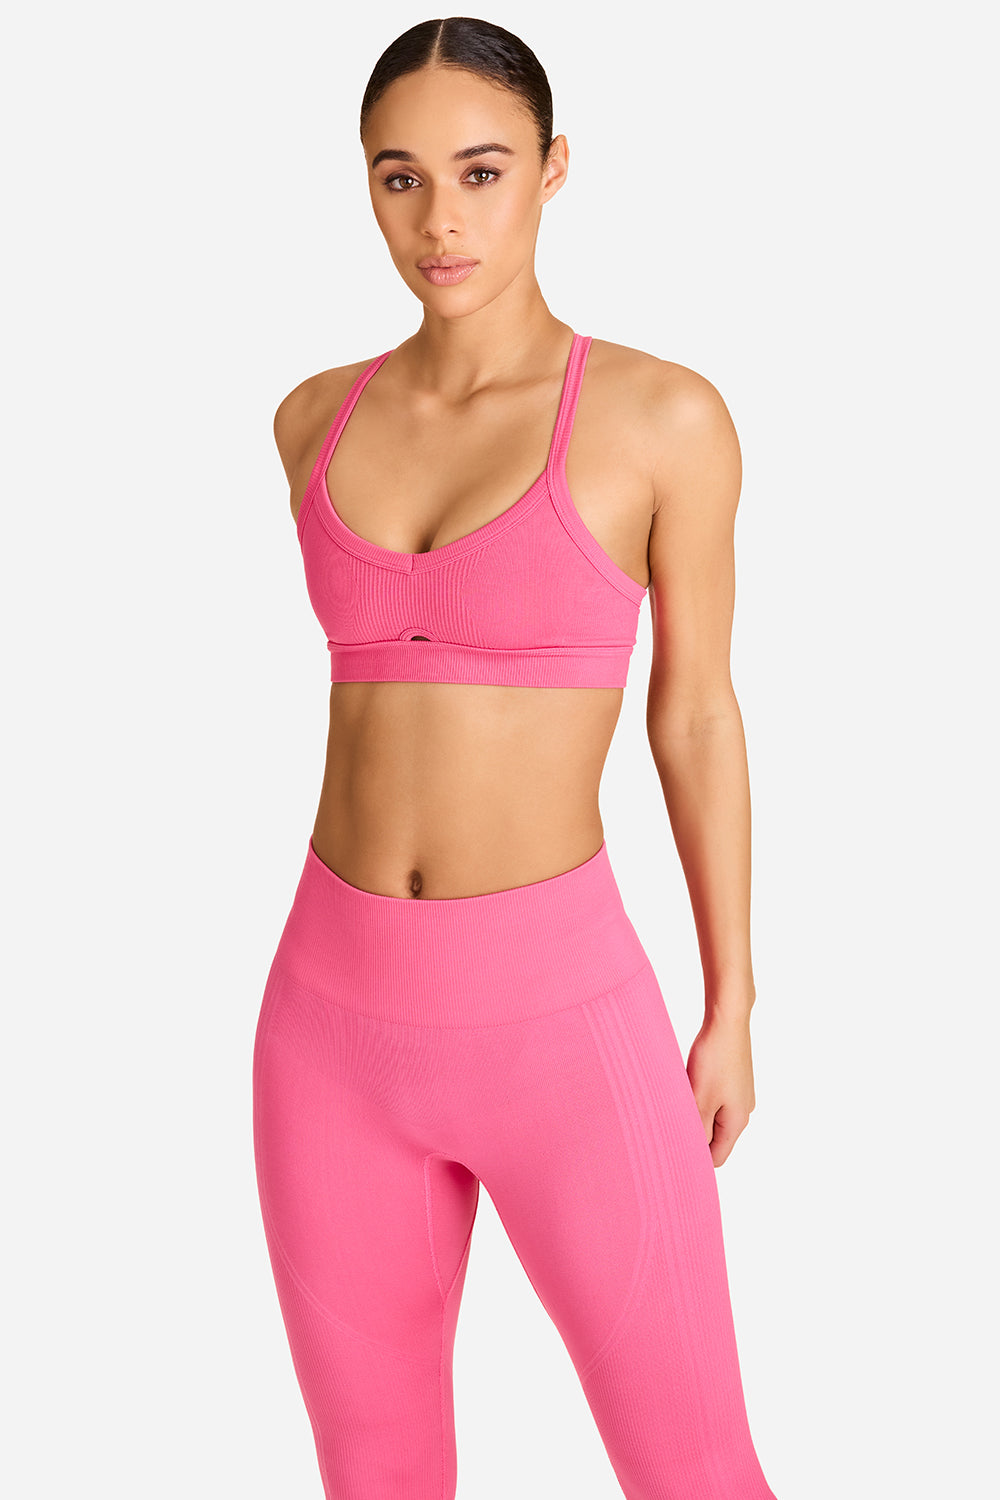 Alala Barre Cami Bra for women in Pink Punch